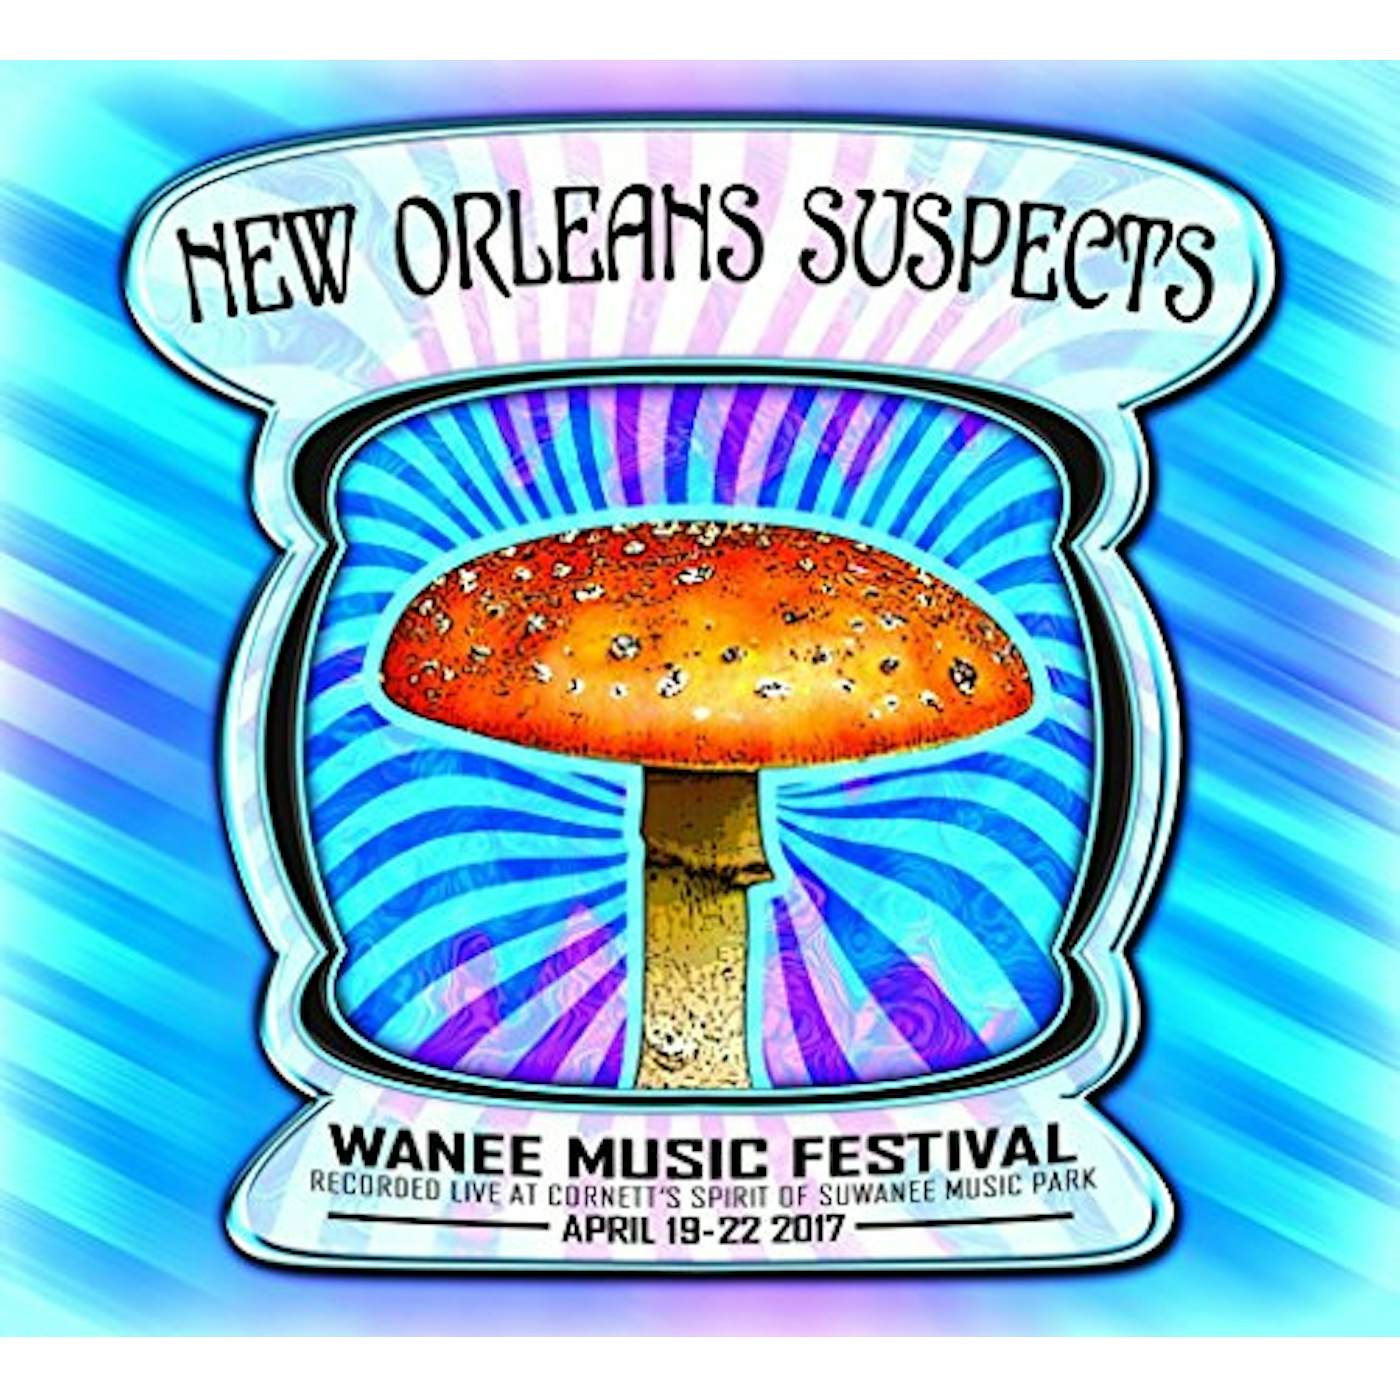 The New Orleans Suspects LIVE AT WANEE 2017 CD